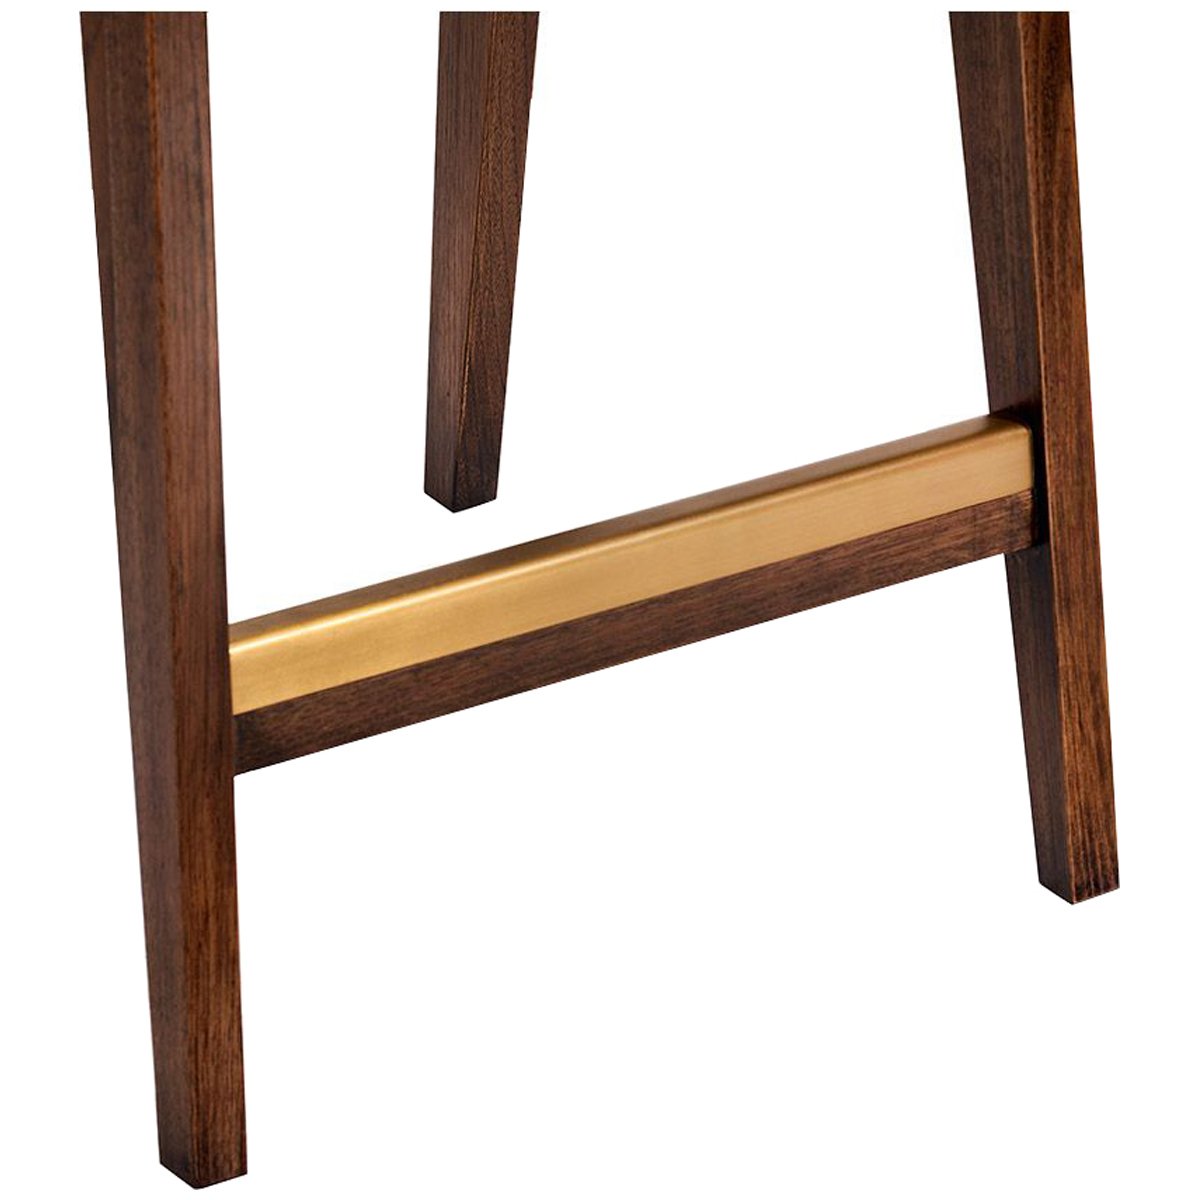 Interlude Home Louis Counter Stool